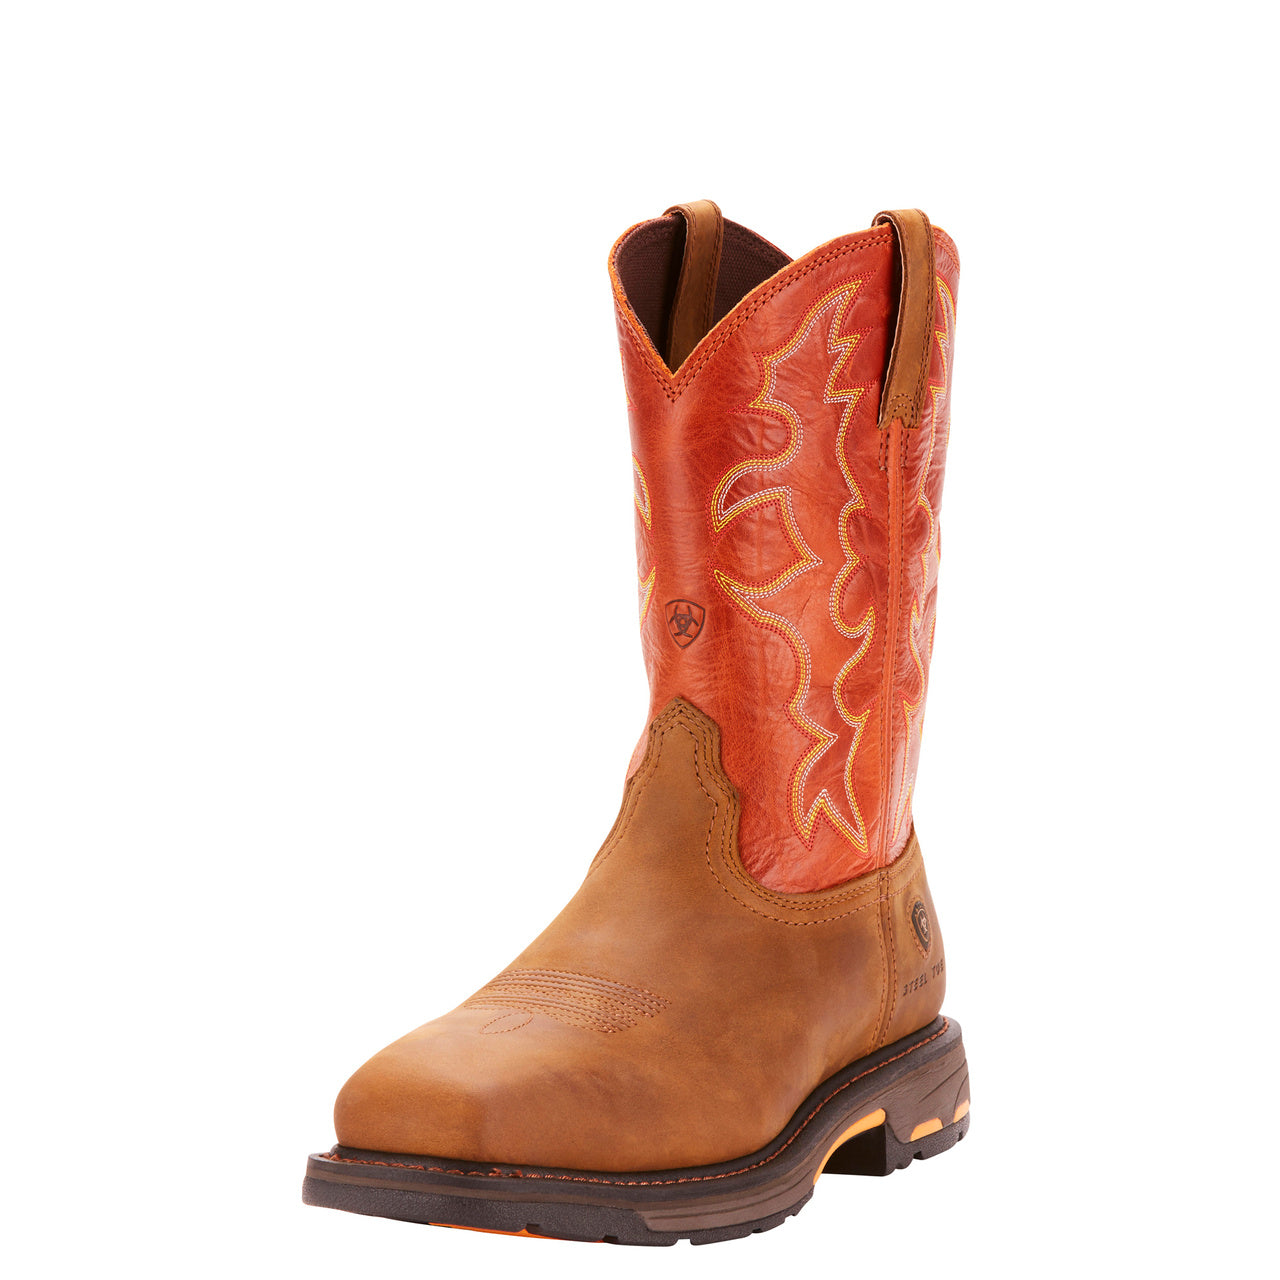 Ariat Workhog Wide Square Toe Boot 11 D